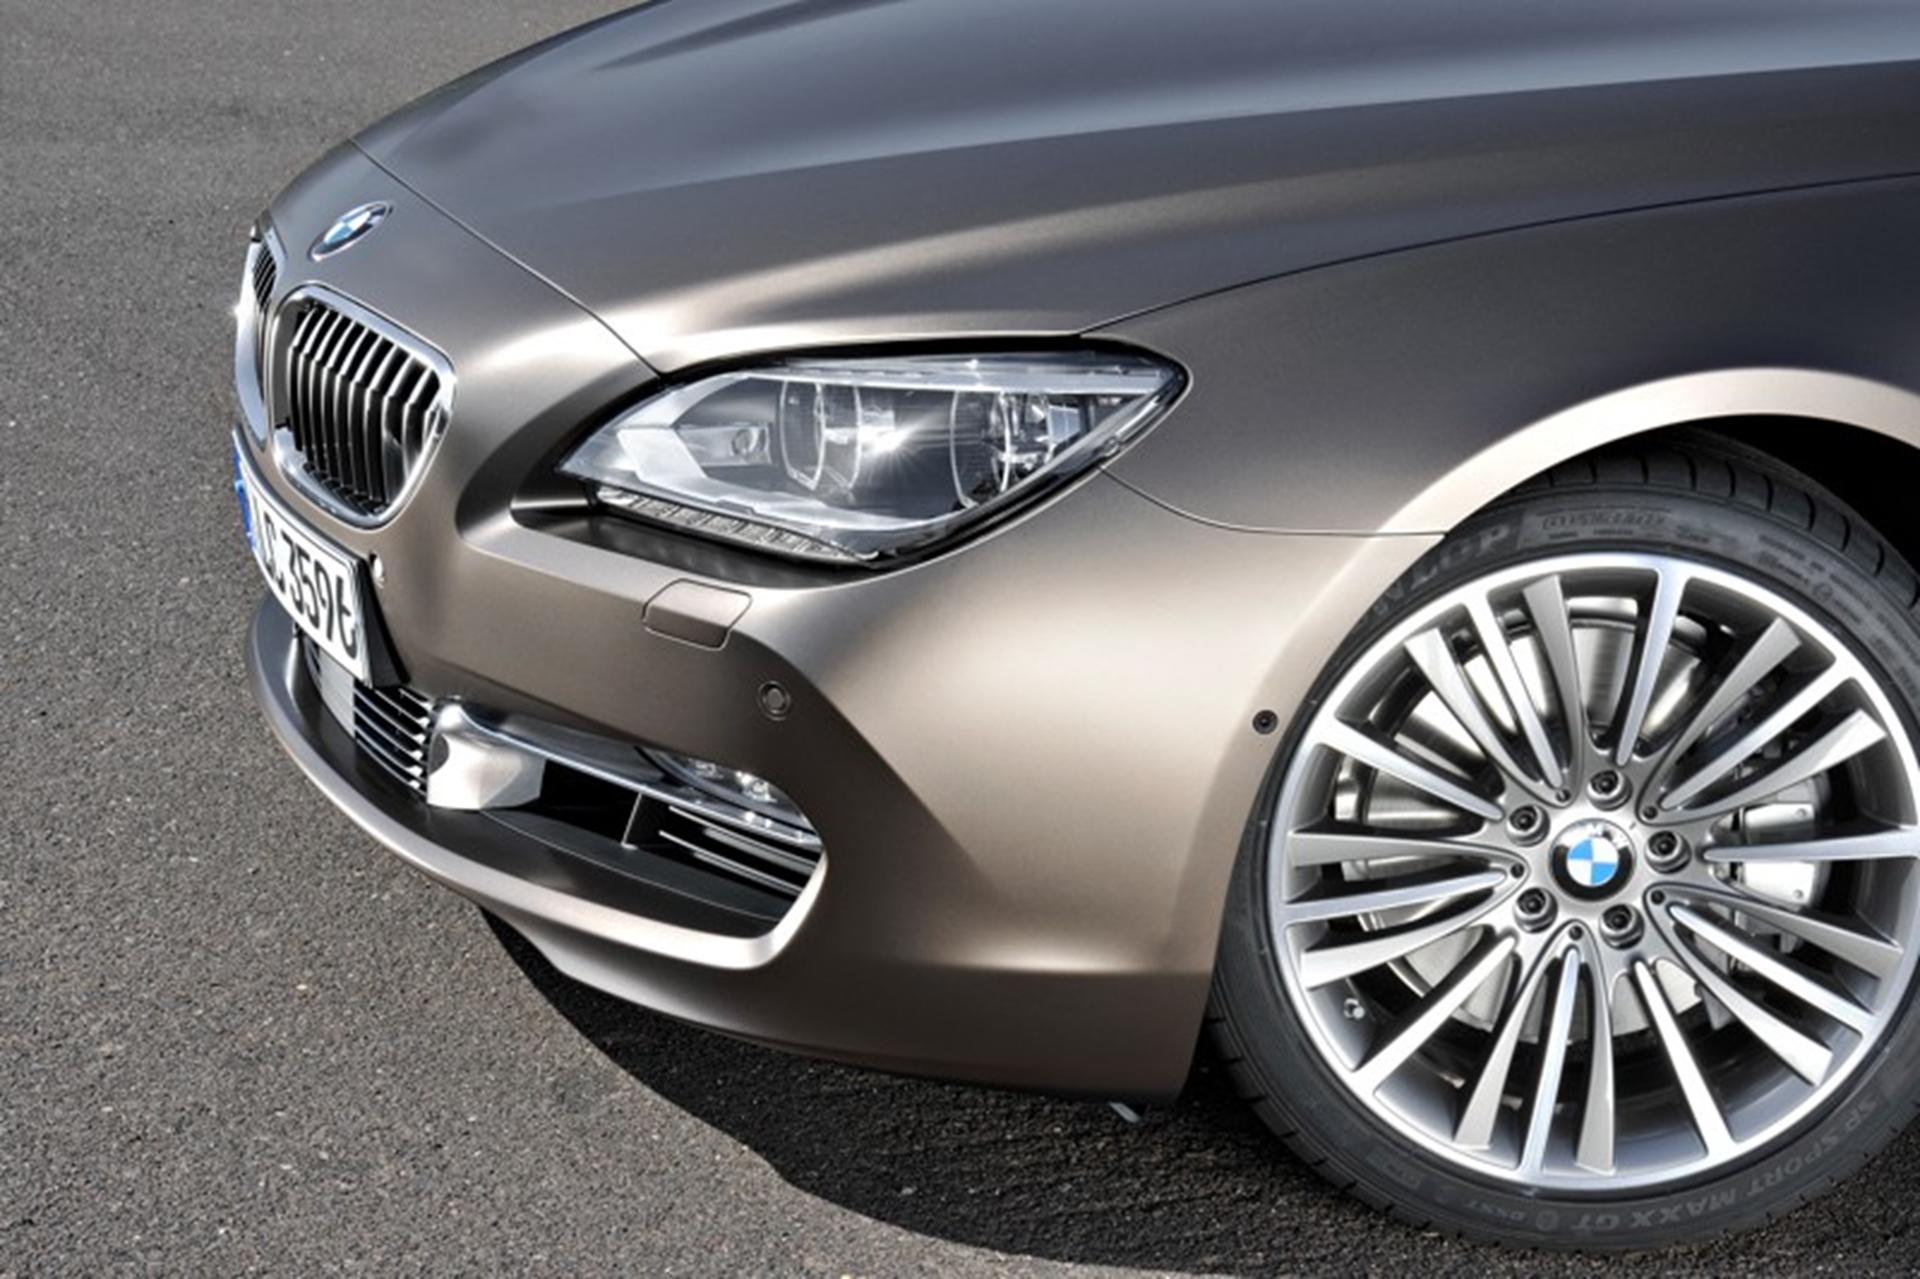 Sporting Character and generous rear space The new BMW 6 Series Gran Coupe